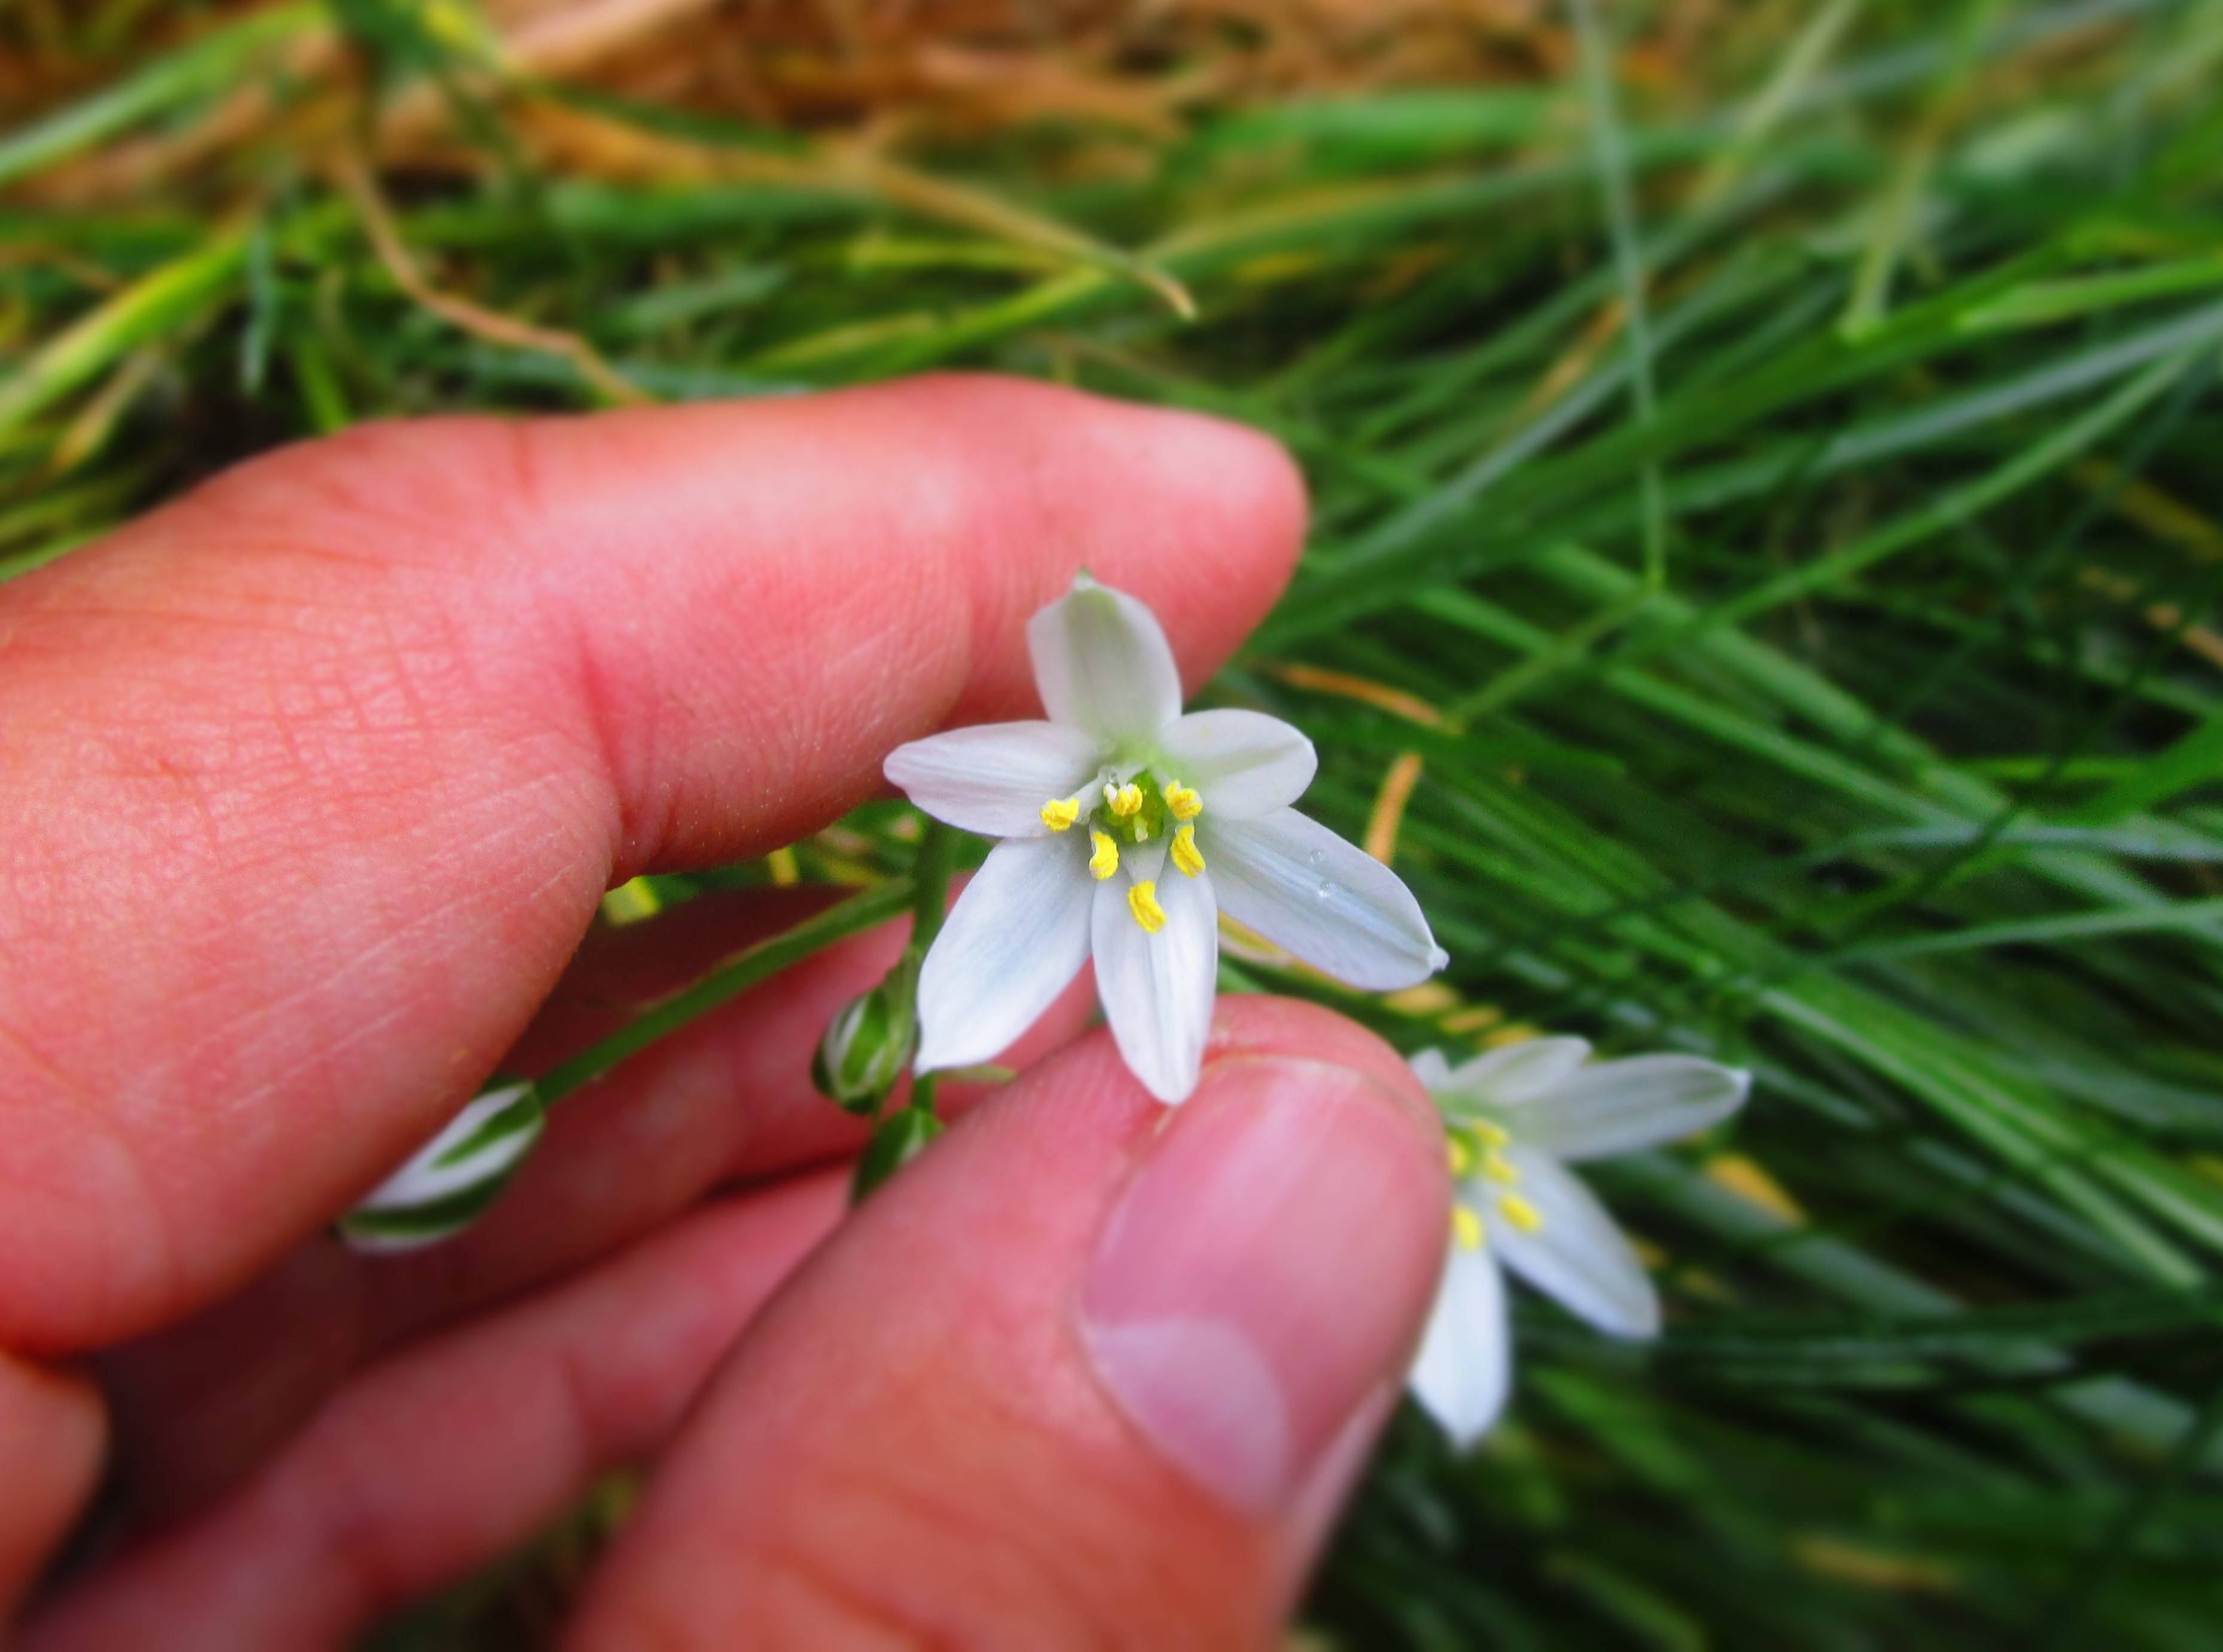 identification - What is this six-petaled white flower with long ...